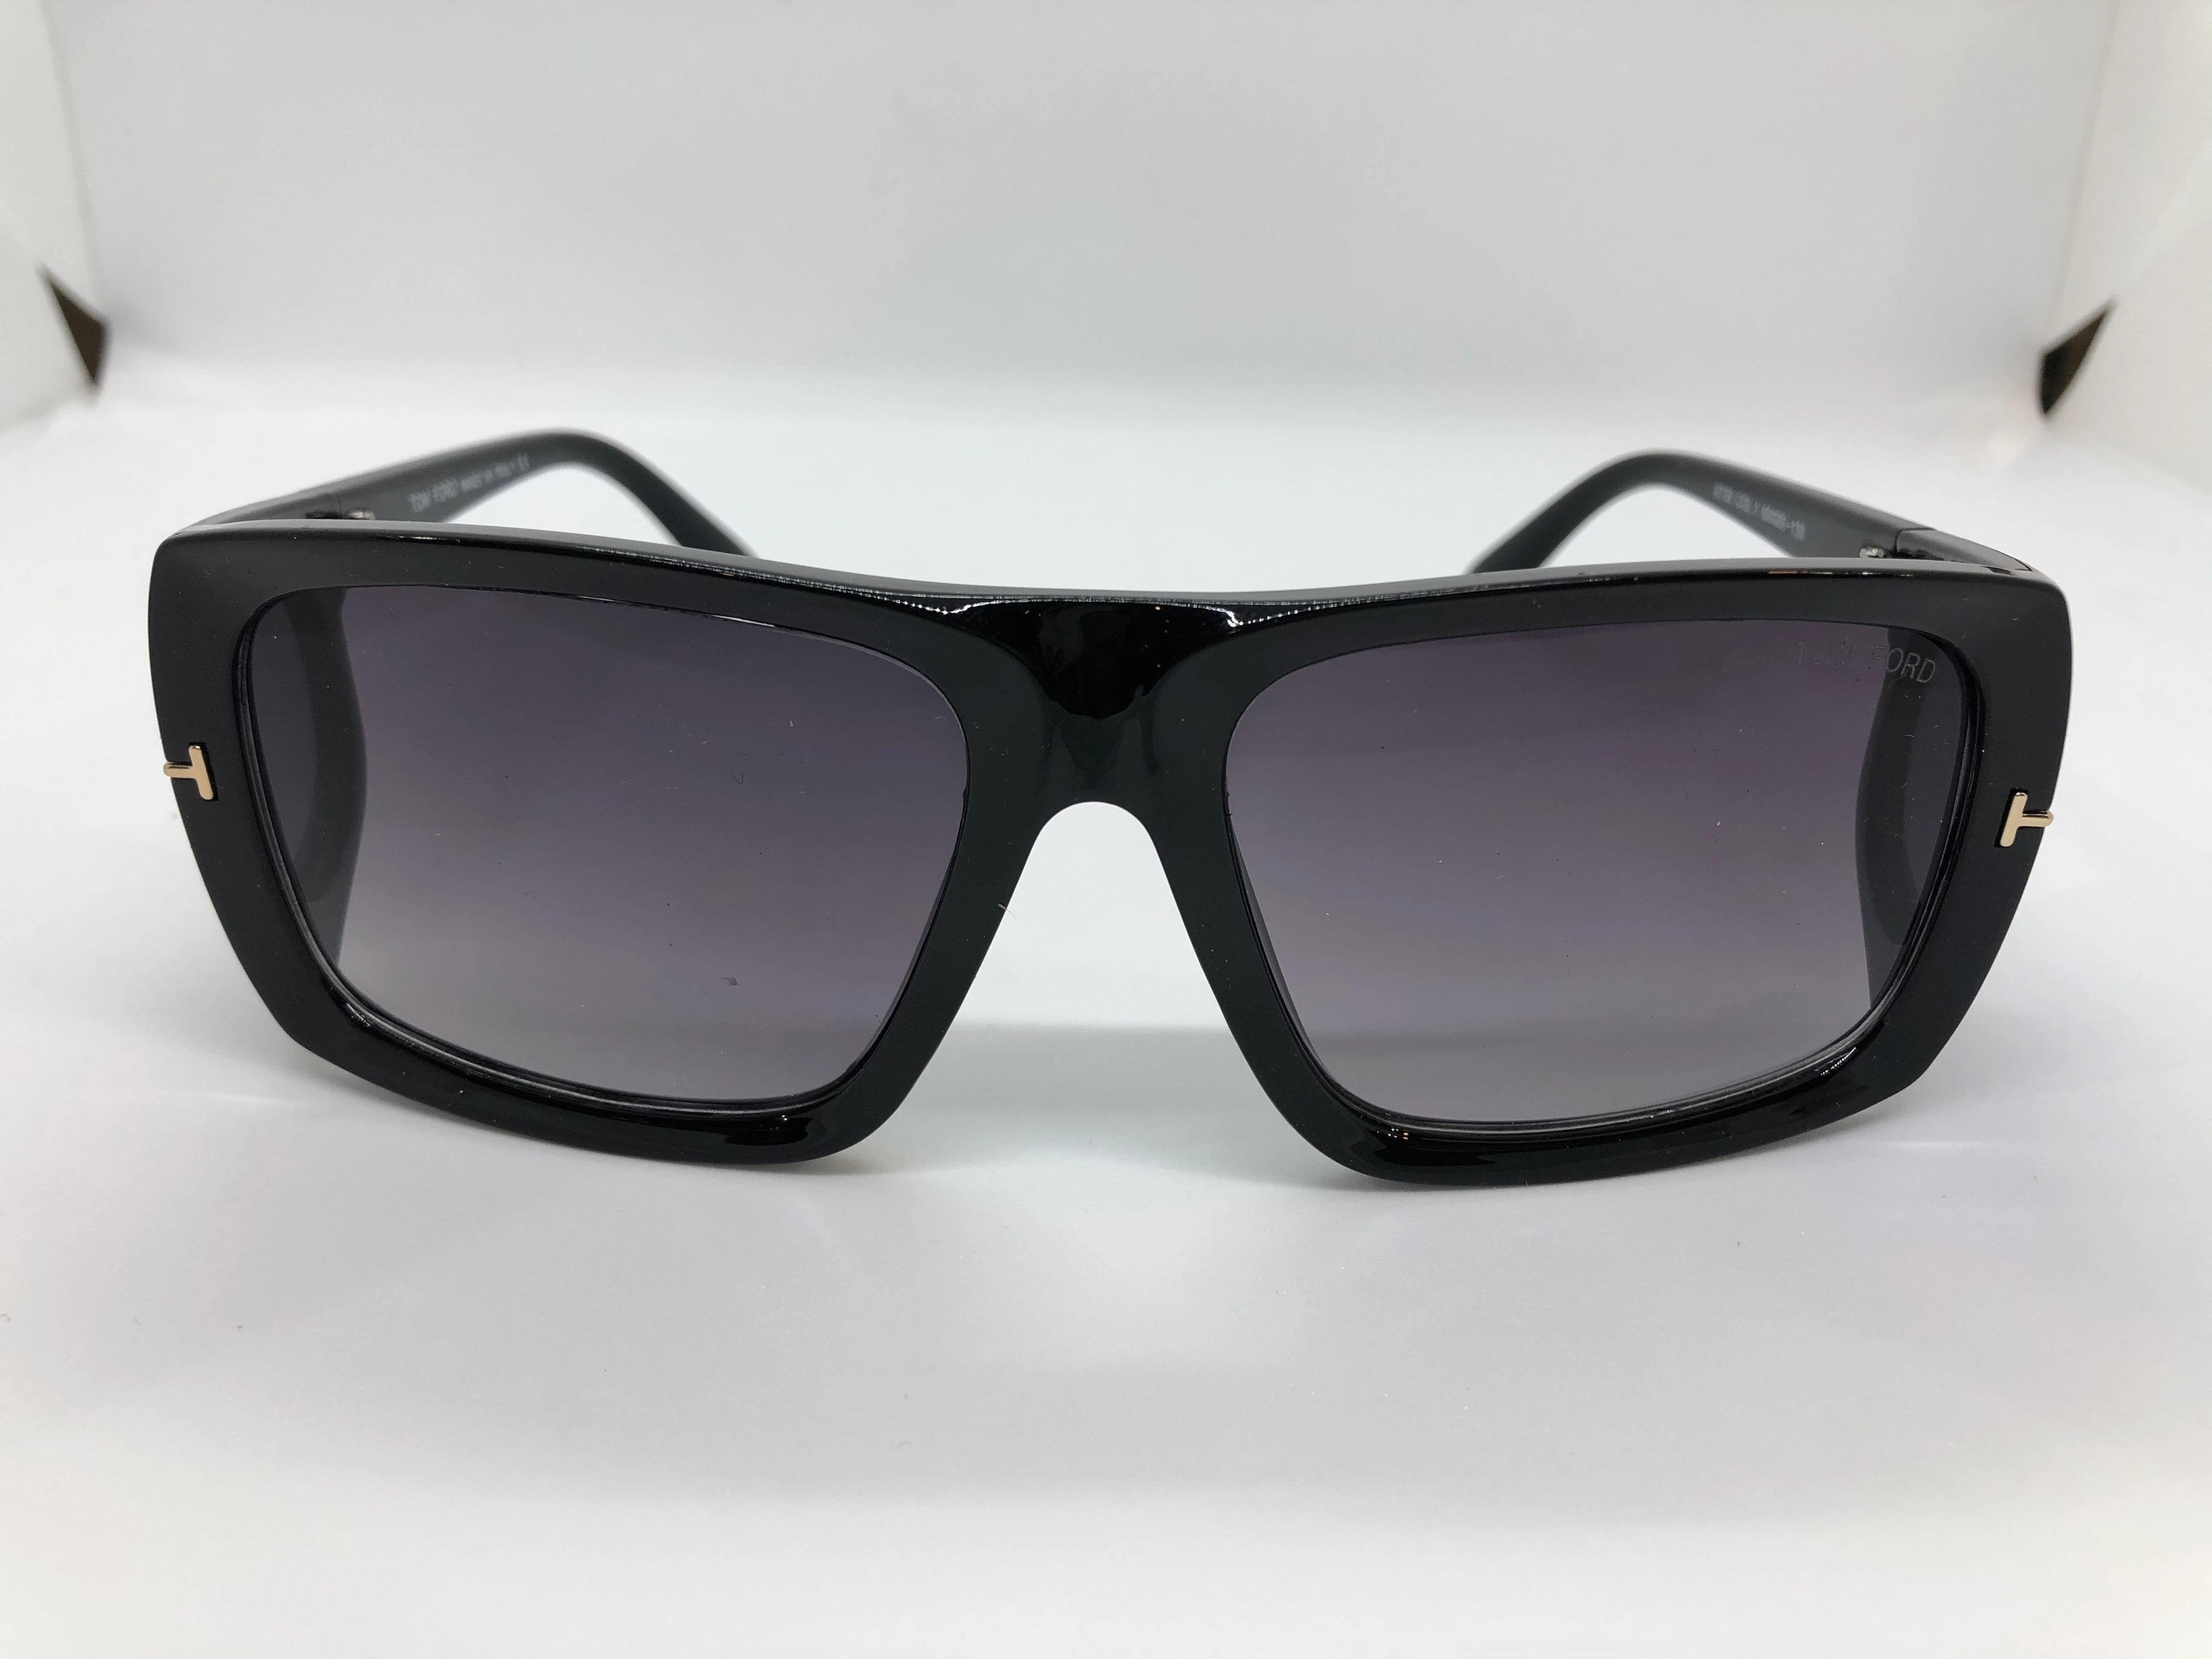 Sunglasses - from Tom Ford - with a black polycarbonate frame - black gradient lenses - and black polycarbonate arm - for women